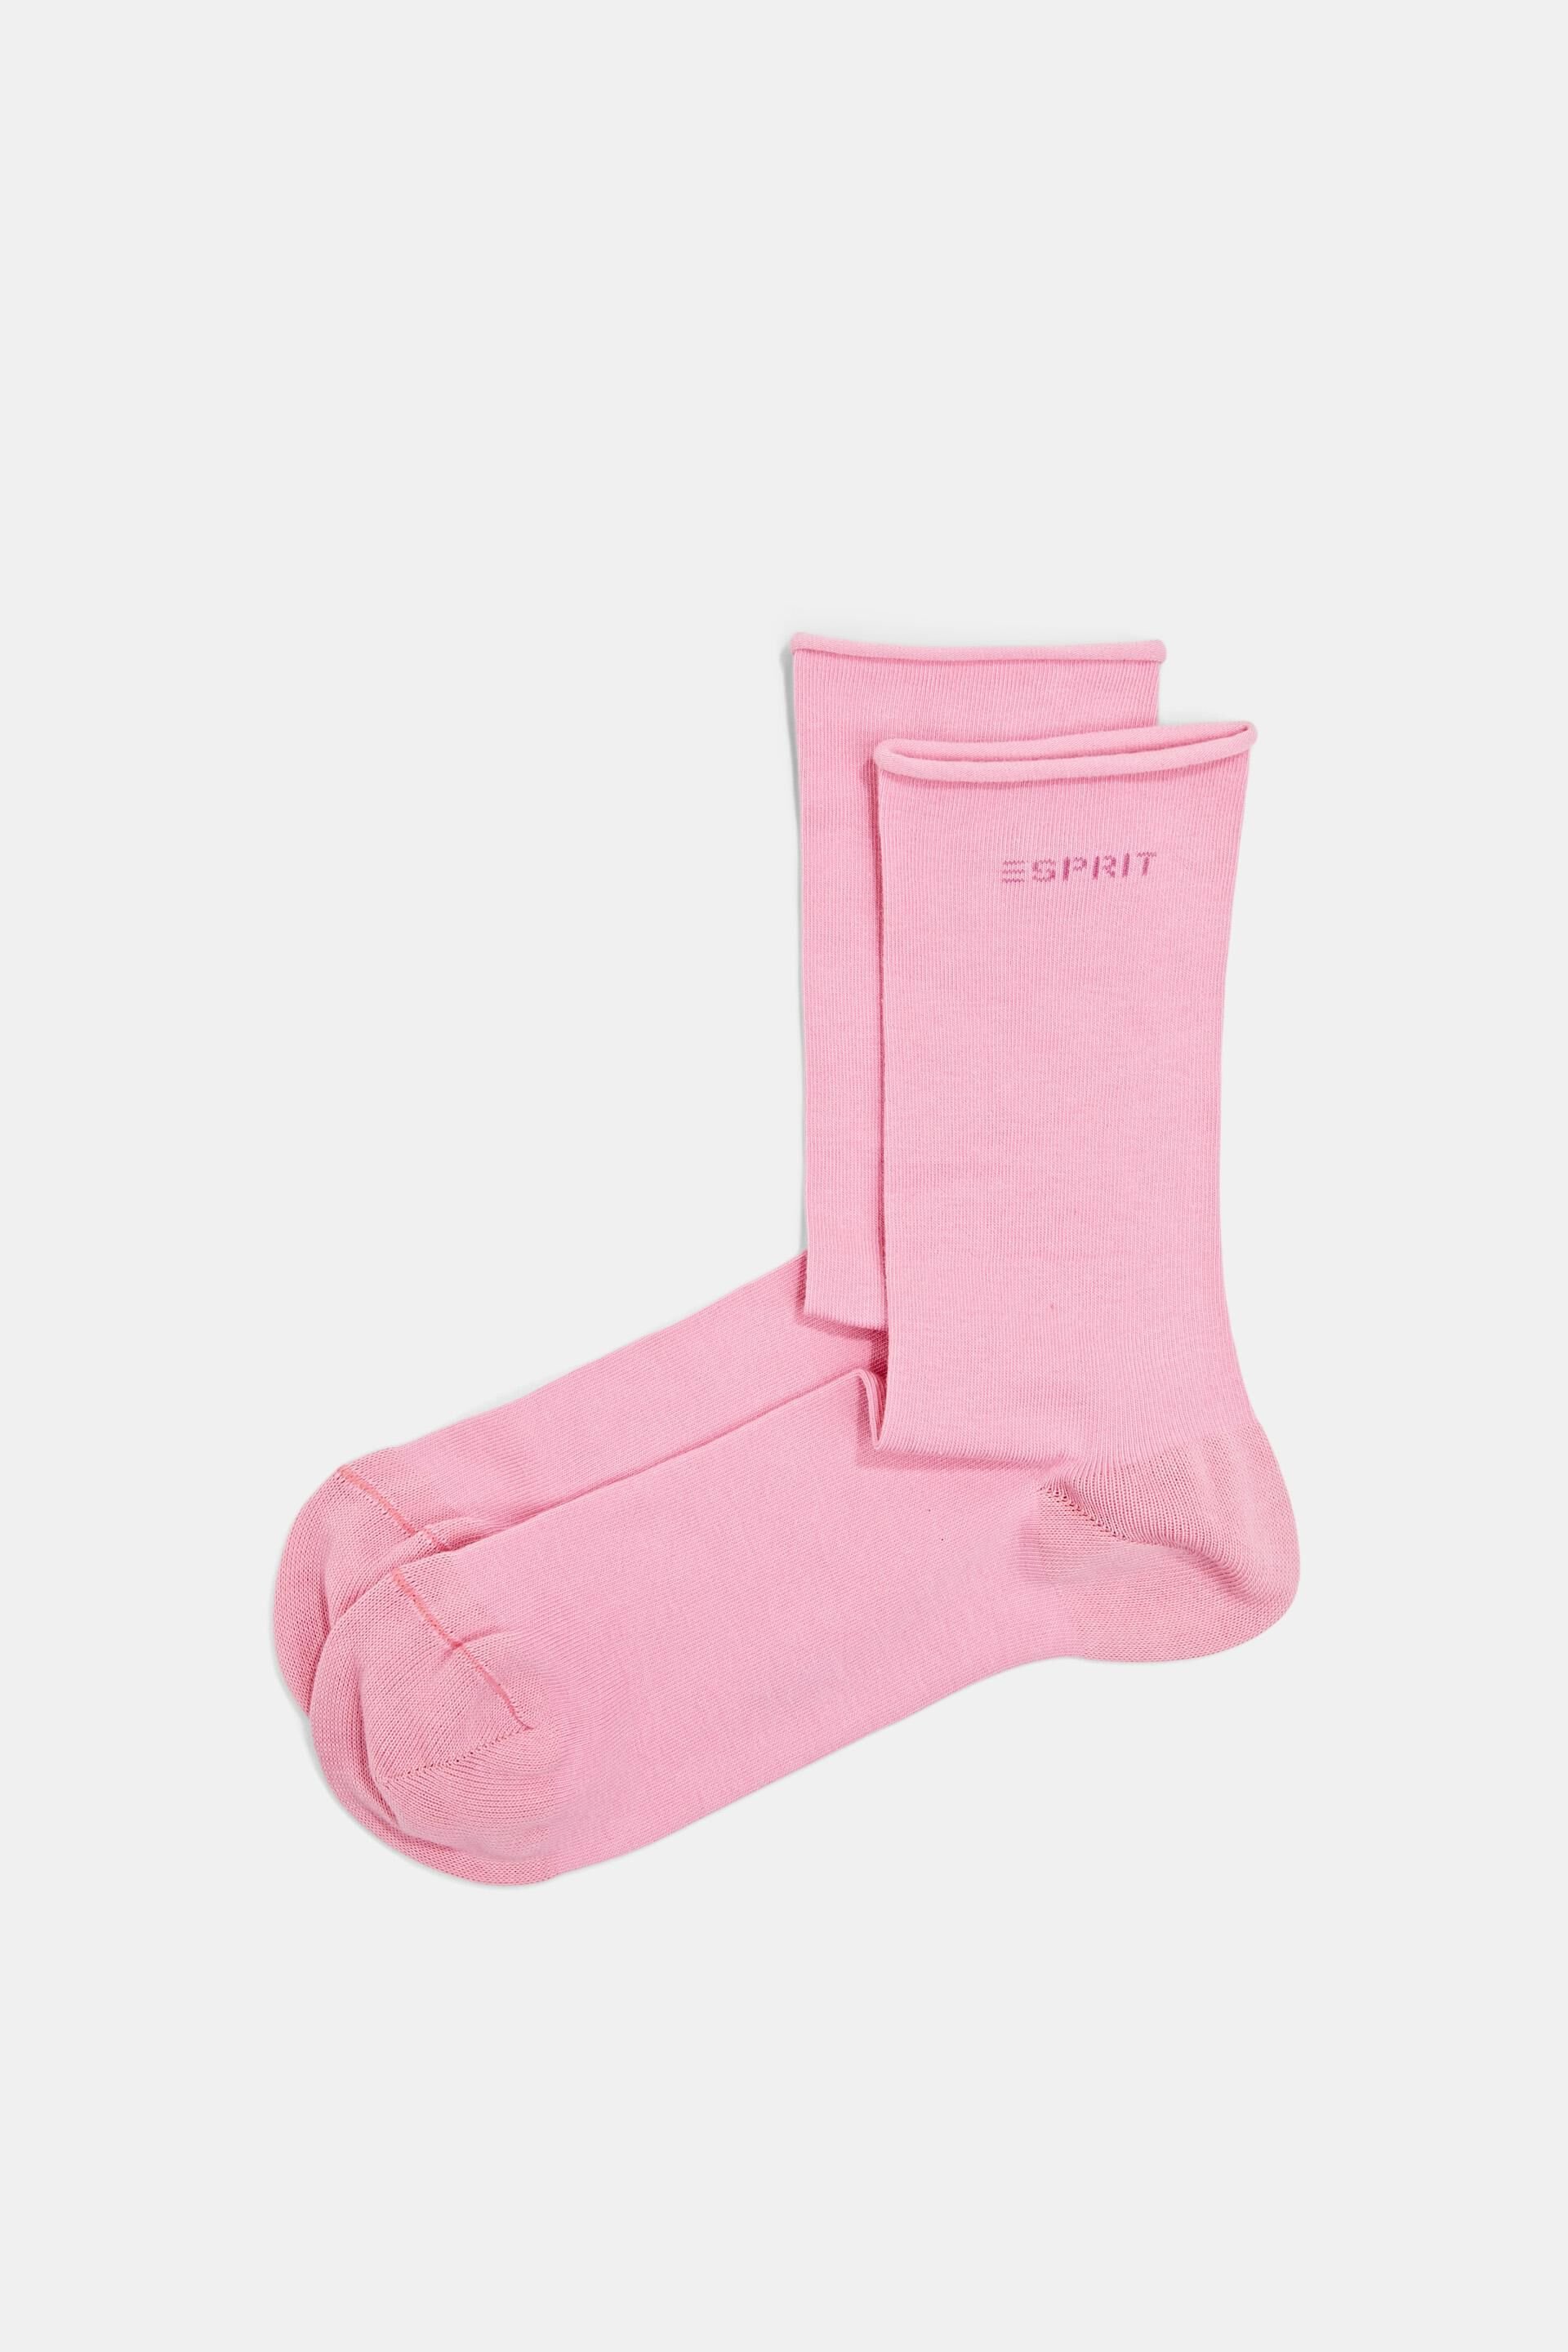 Esprit of with rolled 2-pack edges, organic sock cotton